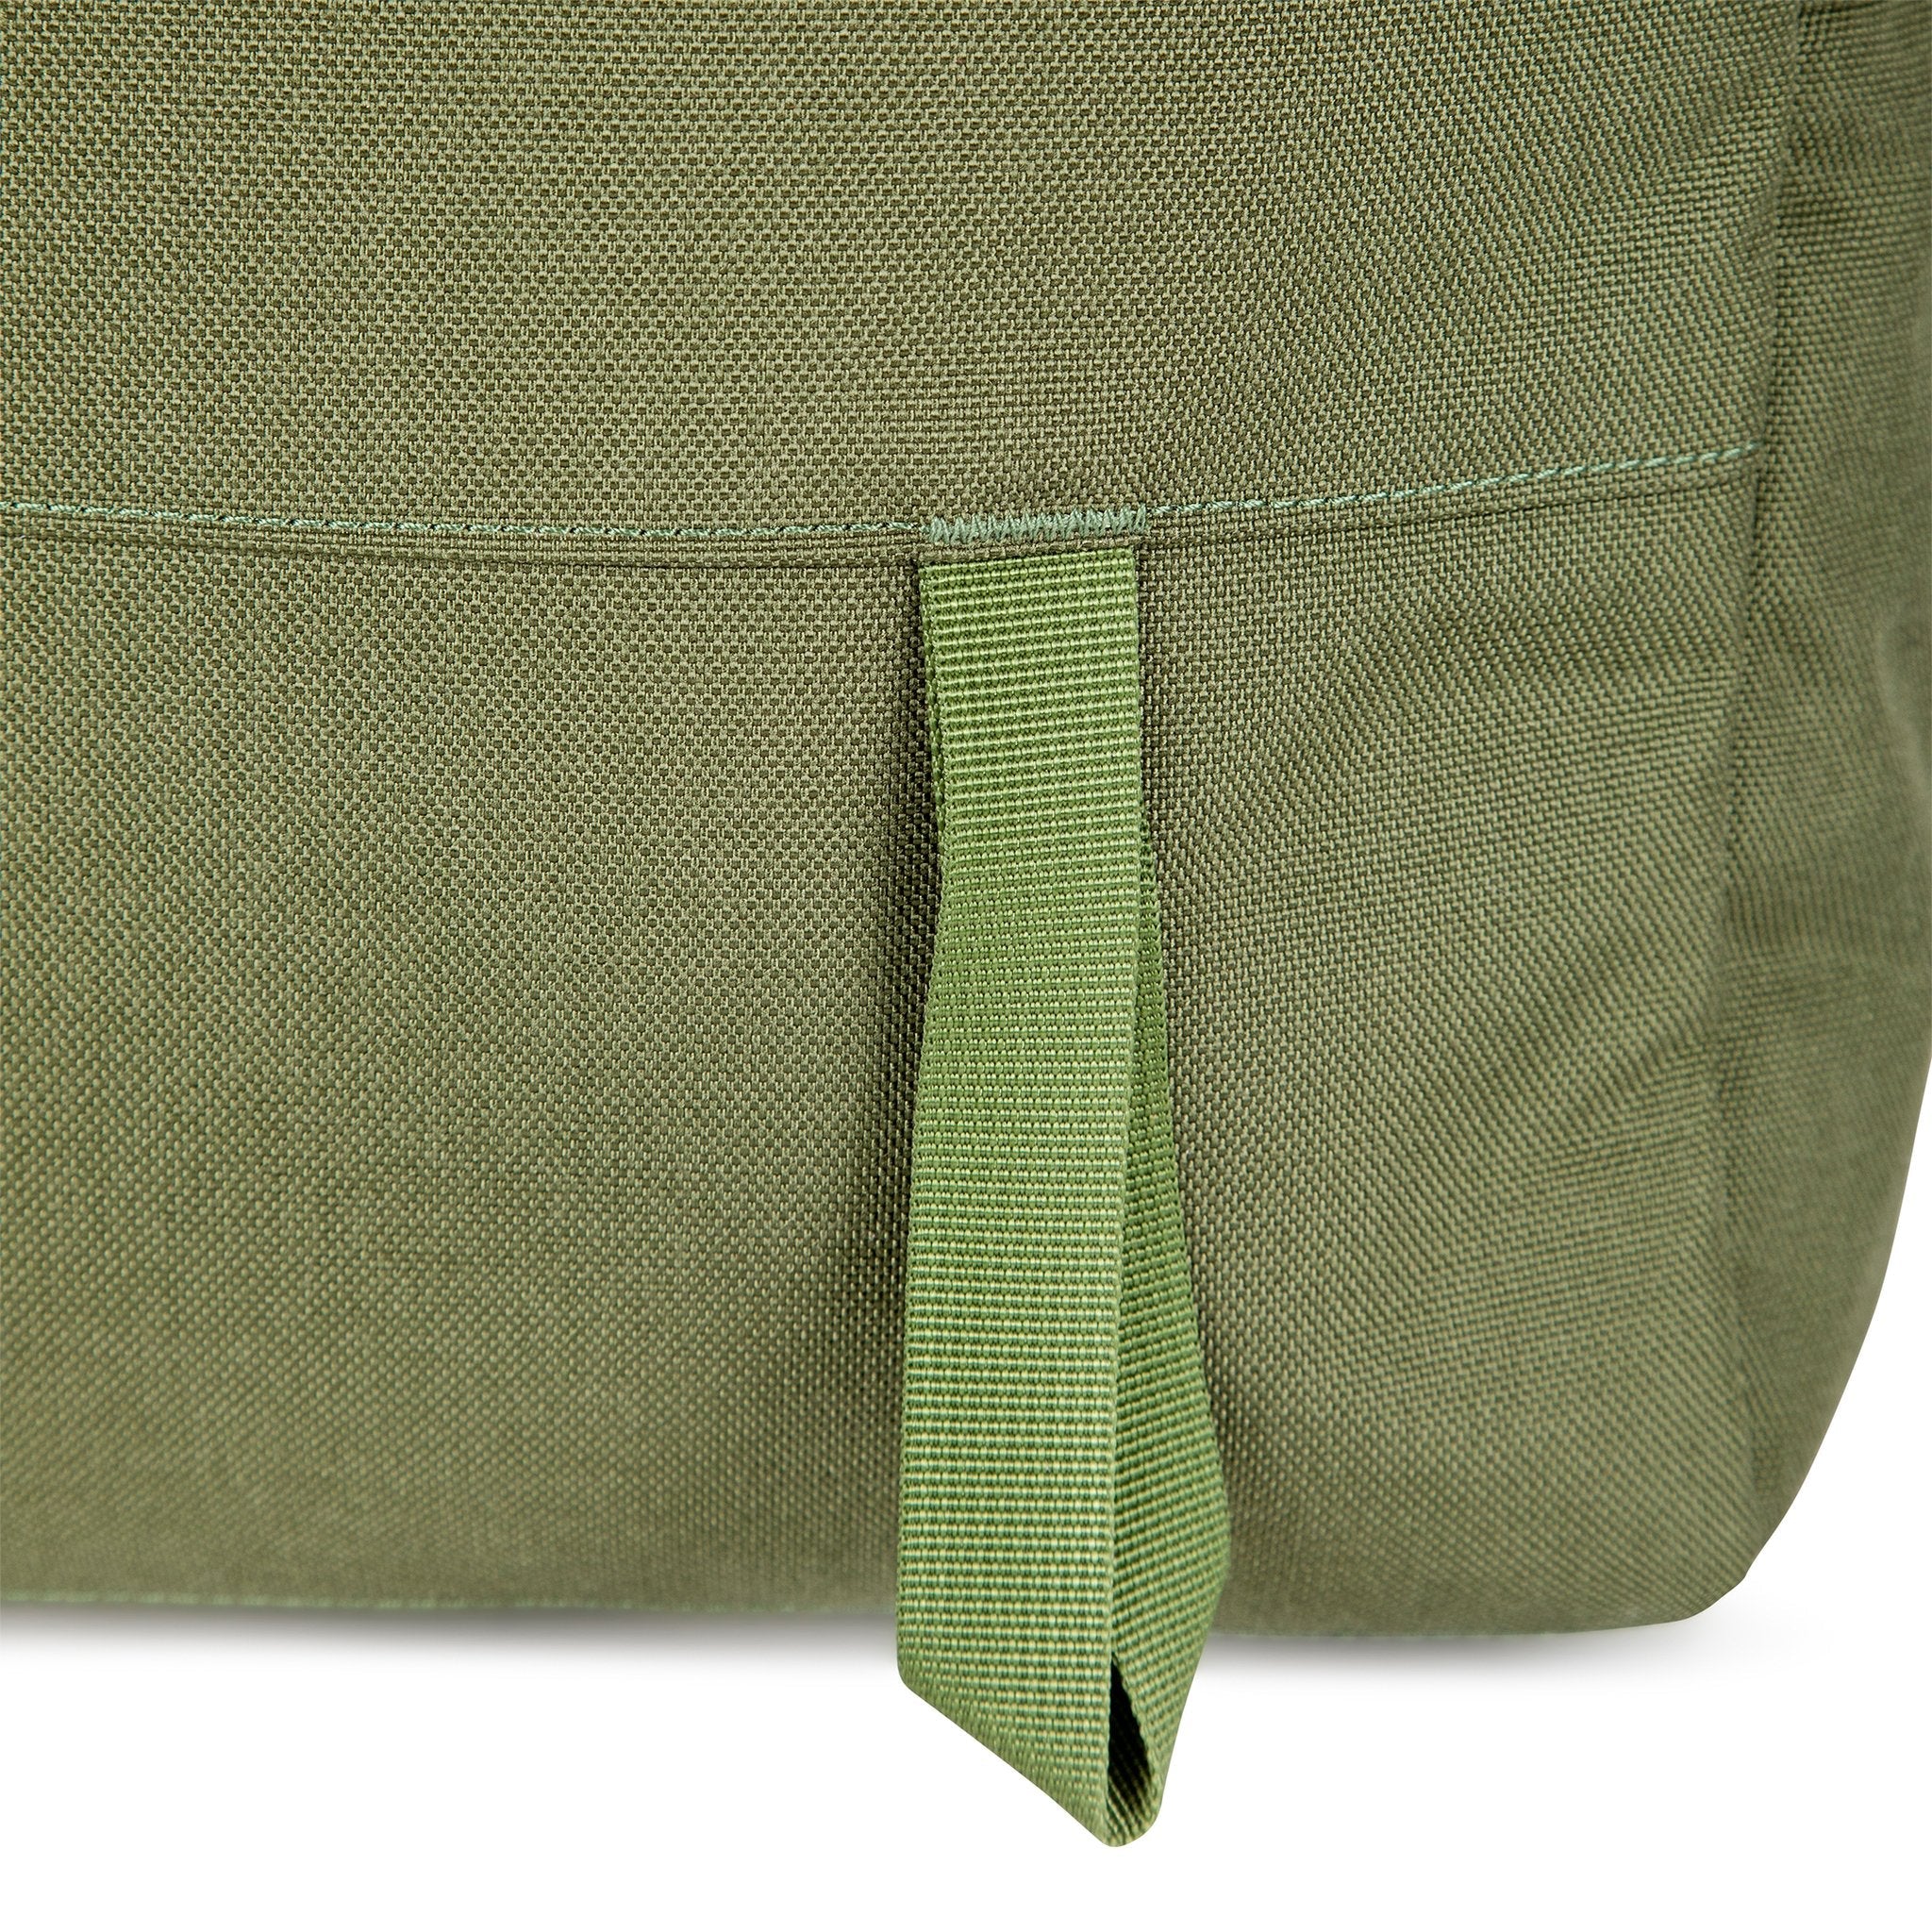 General shot of ice axe loop on Topo Designs Daypack Tech 100% recycled nylon backpack in "Olive" green.